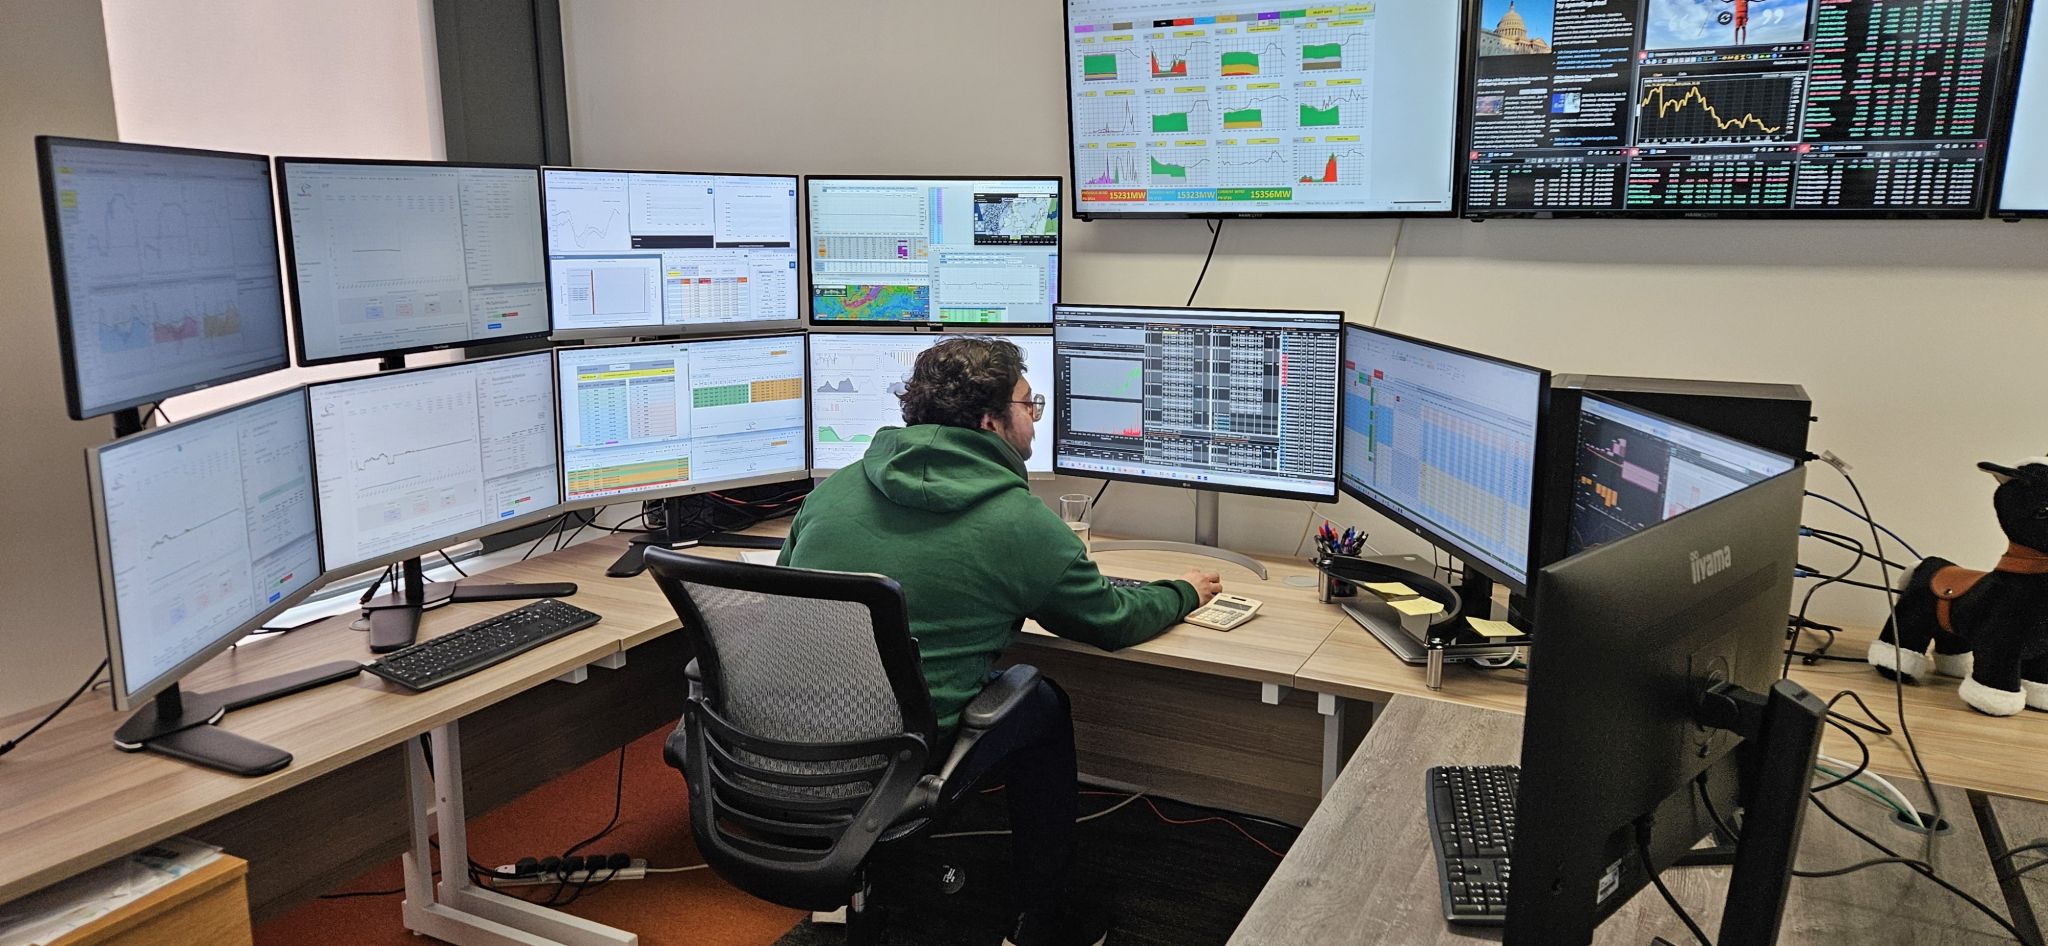 Asset & Trading, Noriker Power's asset optimisation and energy trading operations, illustrating our expertise in maximizing project value and efficiency